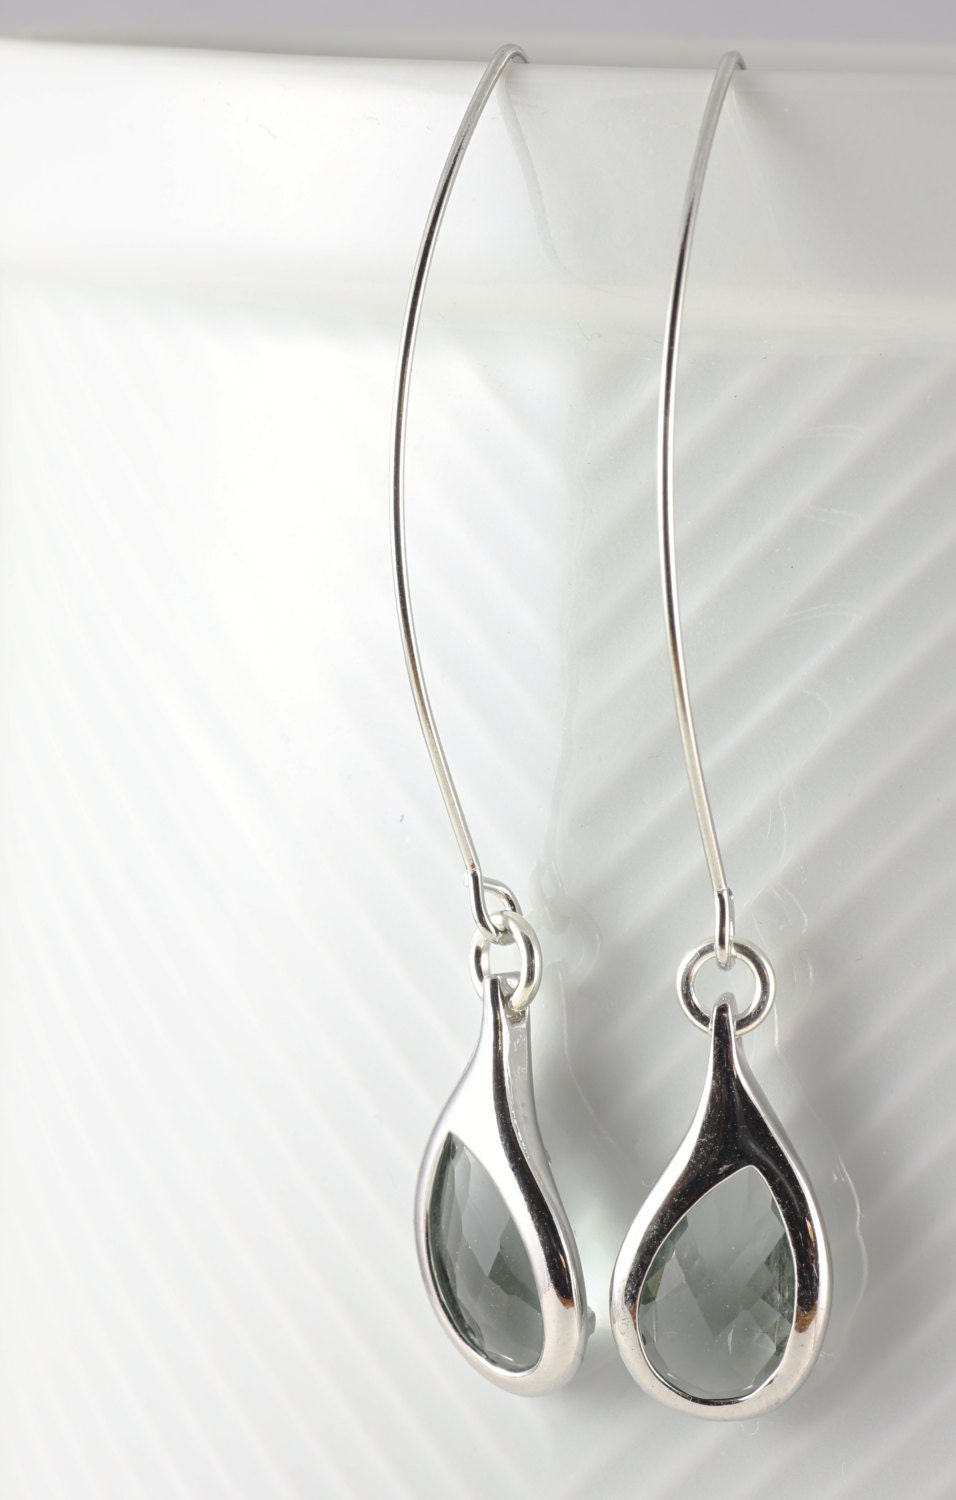 Charcoal Teardrop Earrings With A Shiny Silver Tone Frame - Etsy